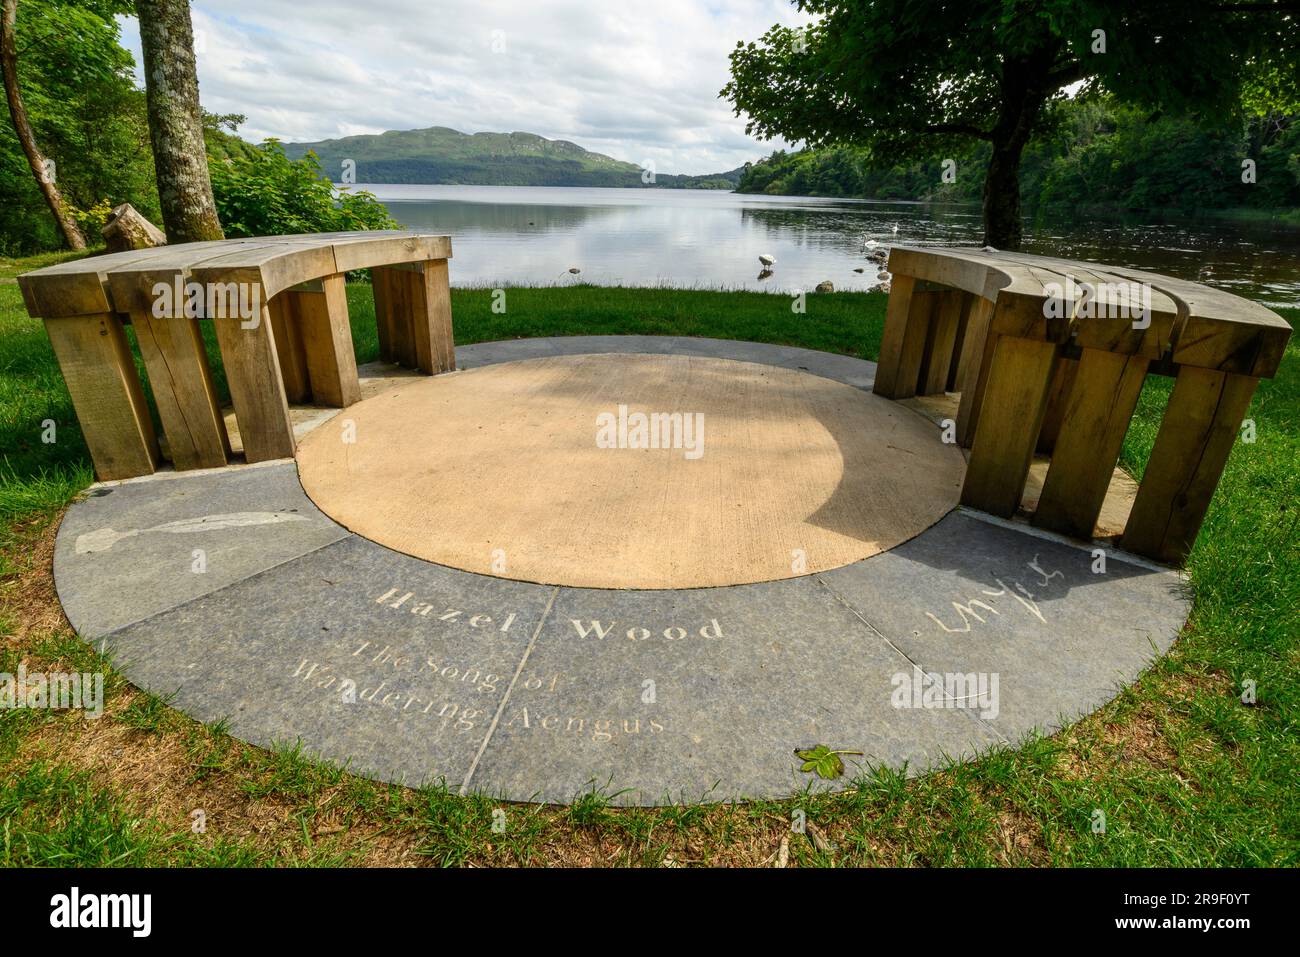 Benches and name plate at Hazelwood, Lough Gill, Country Sligo, Ireland Stock Photo